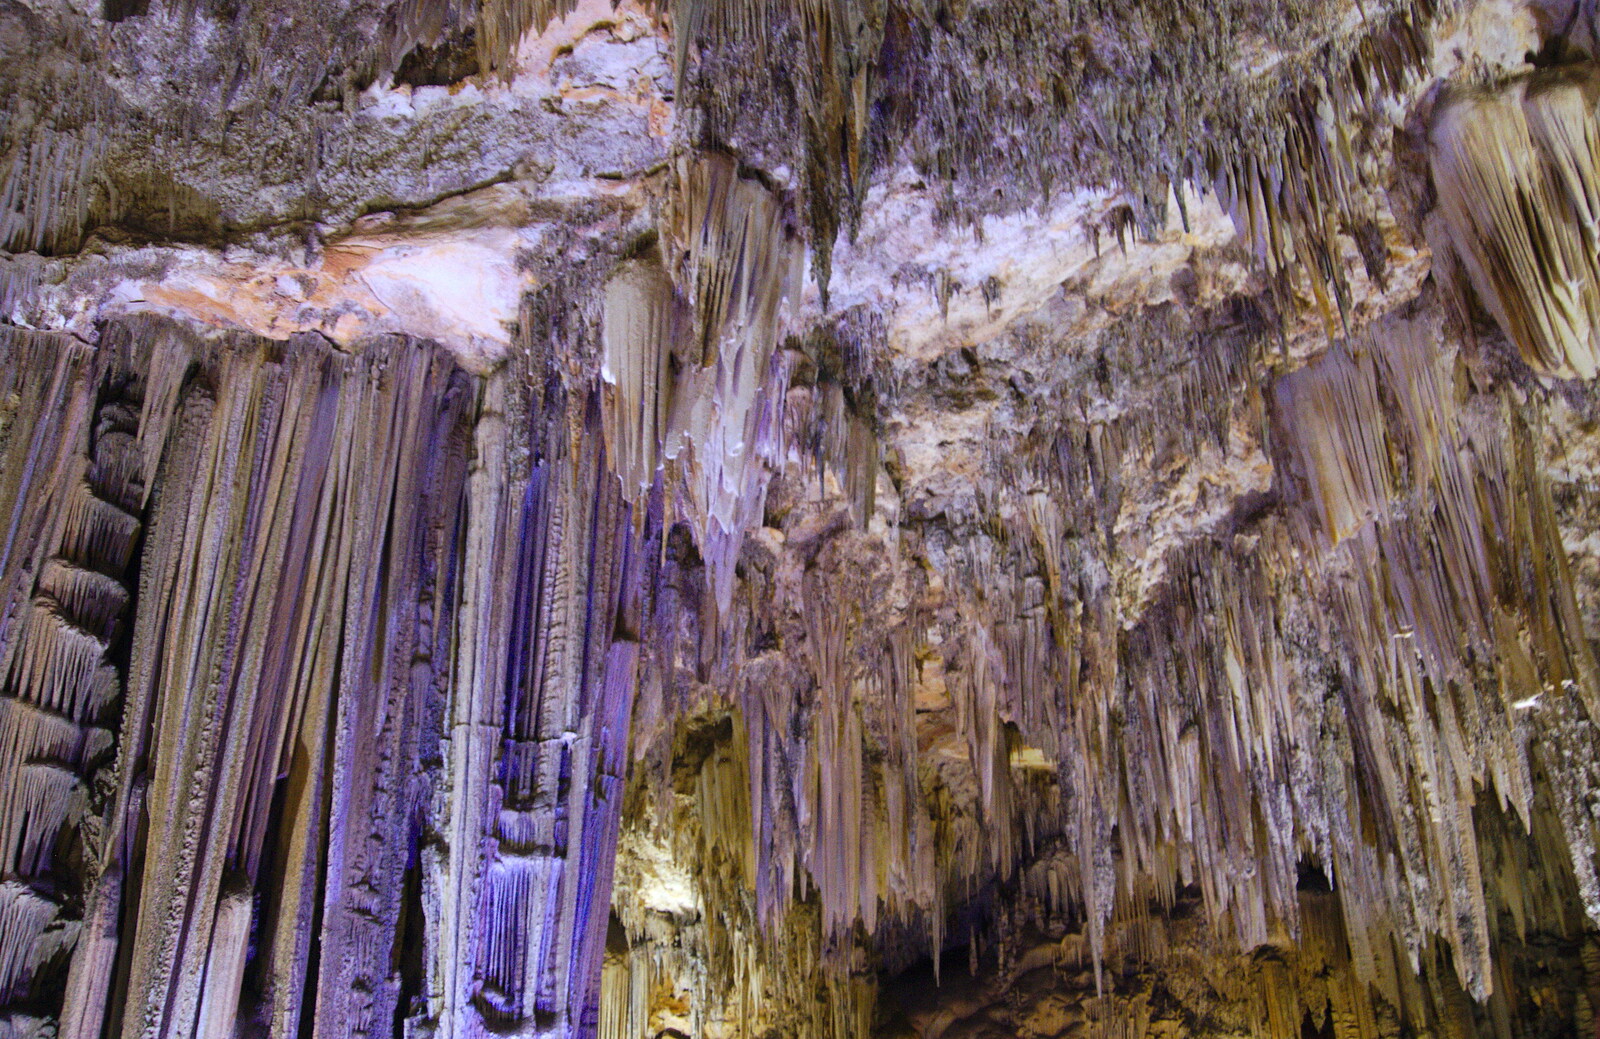 Some more stalactite action from The Caves of Nerja, and Frigiliana, Andalusia, Spain - 18th April 2019